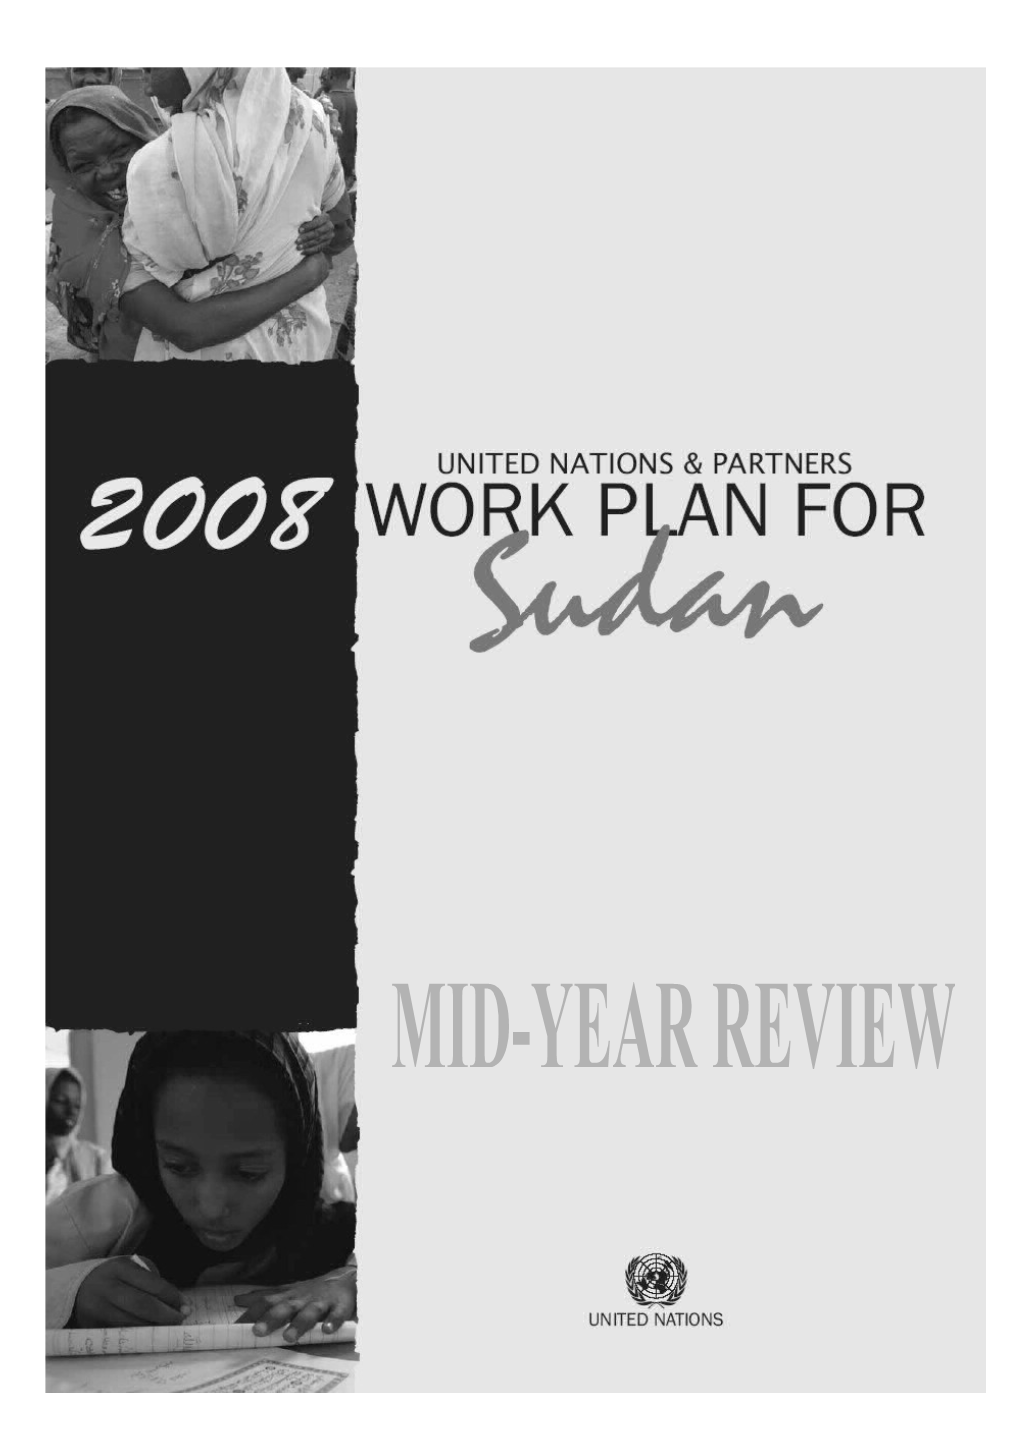 Mid-Year Review of the Workplan for Sudan 2008 (Word)